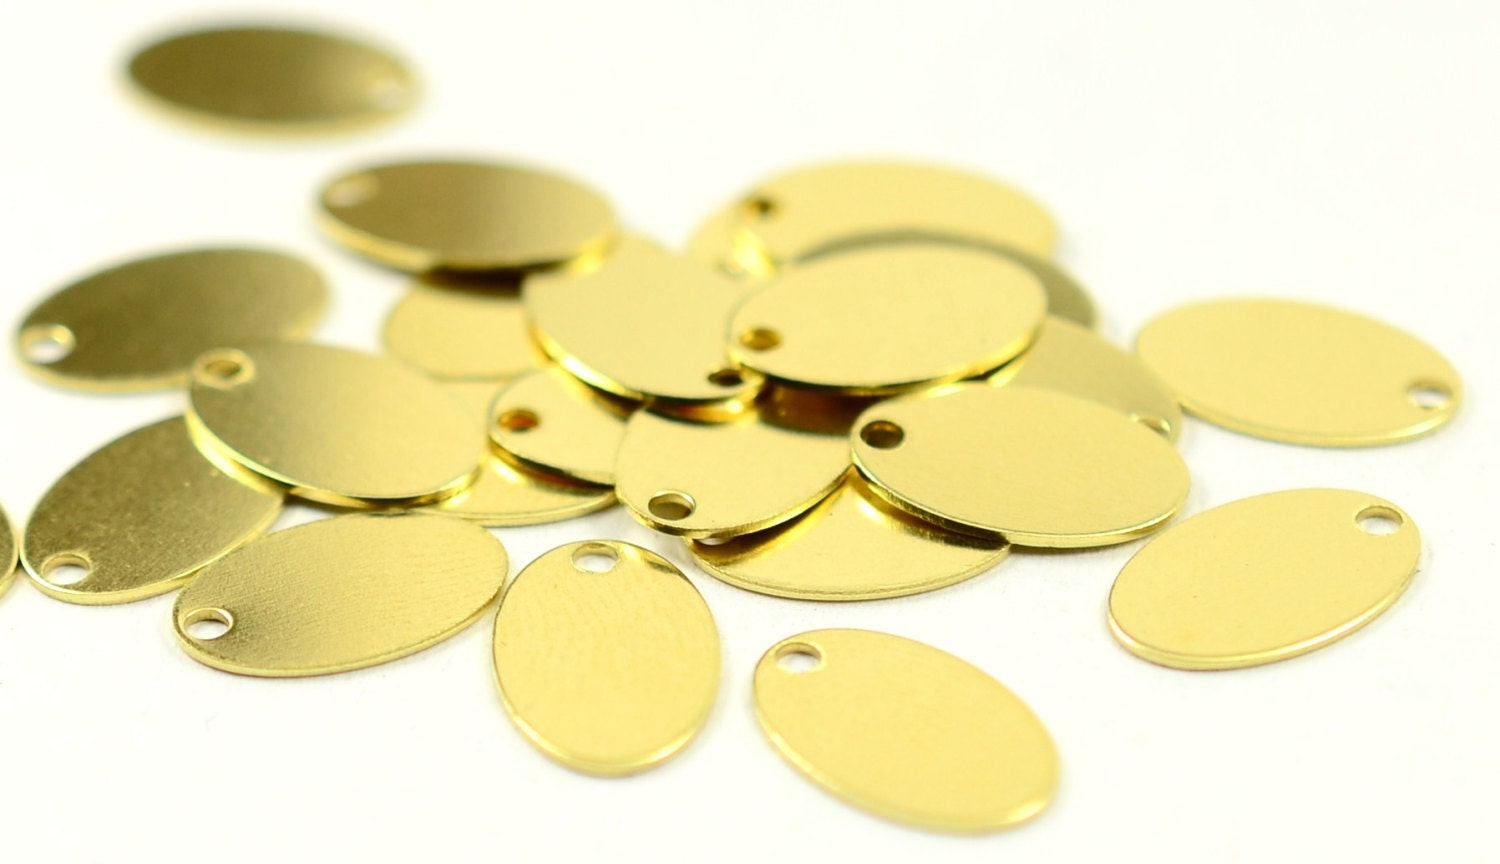 Valerie's Brass tags, notched corners 3/8 x 2.5, (2) holes, READY to  STAMP or ENGRAVE